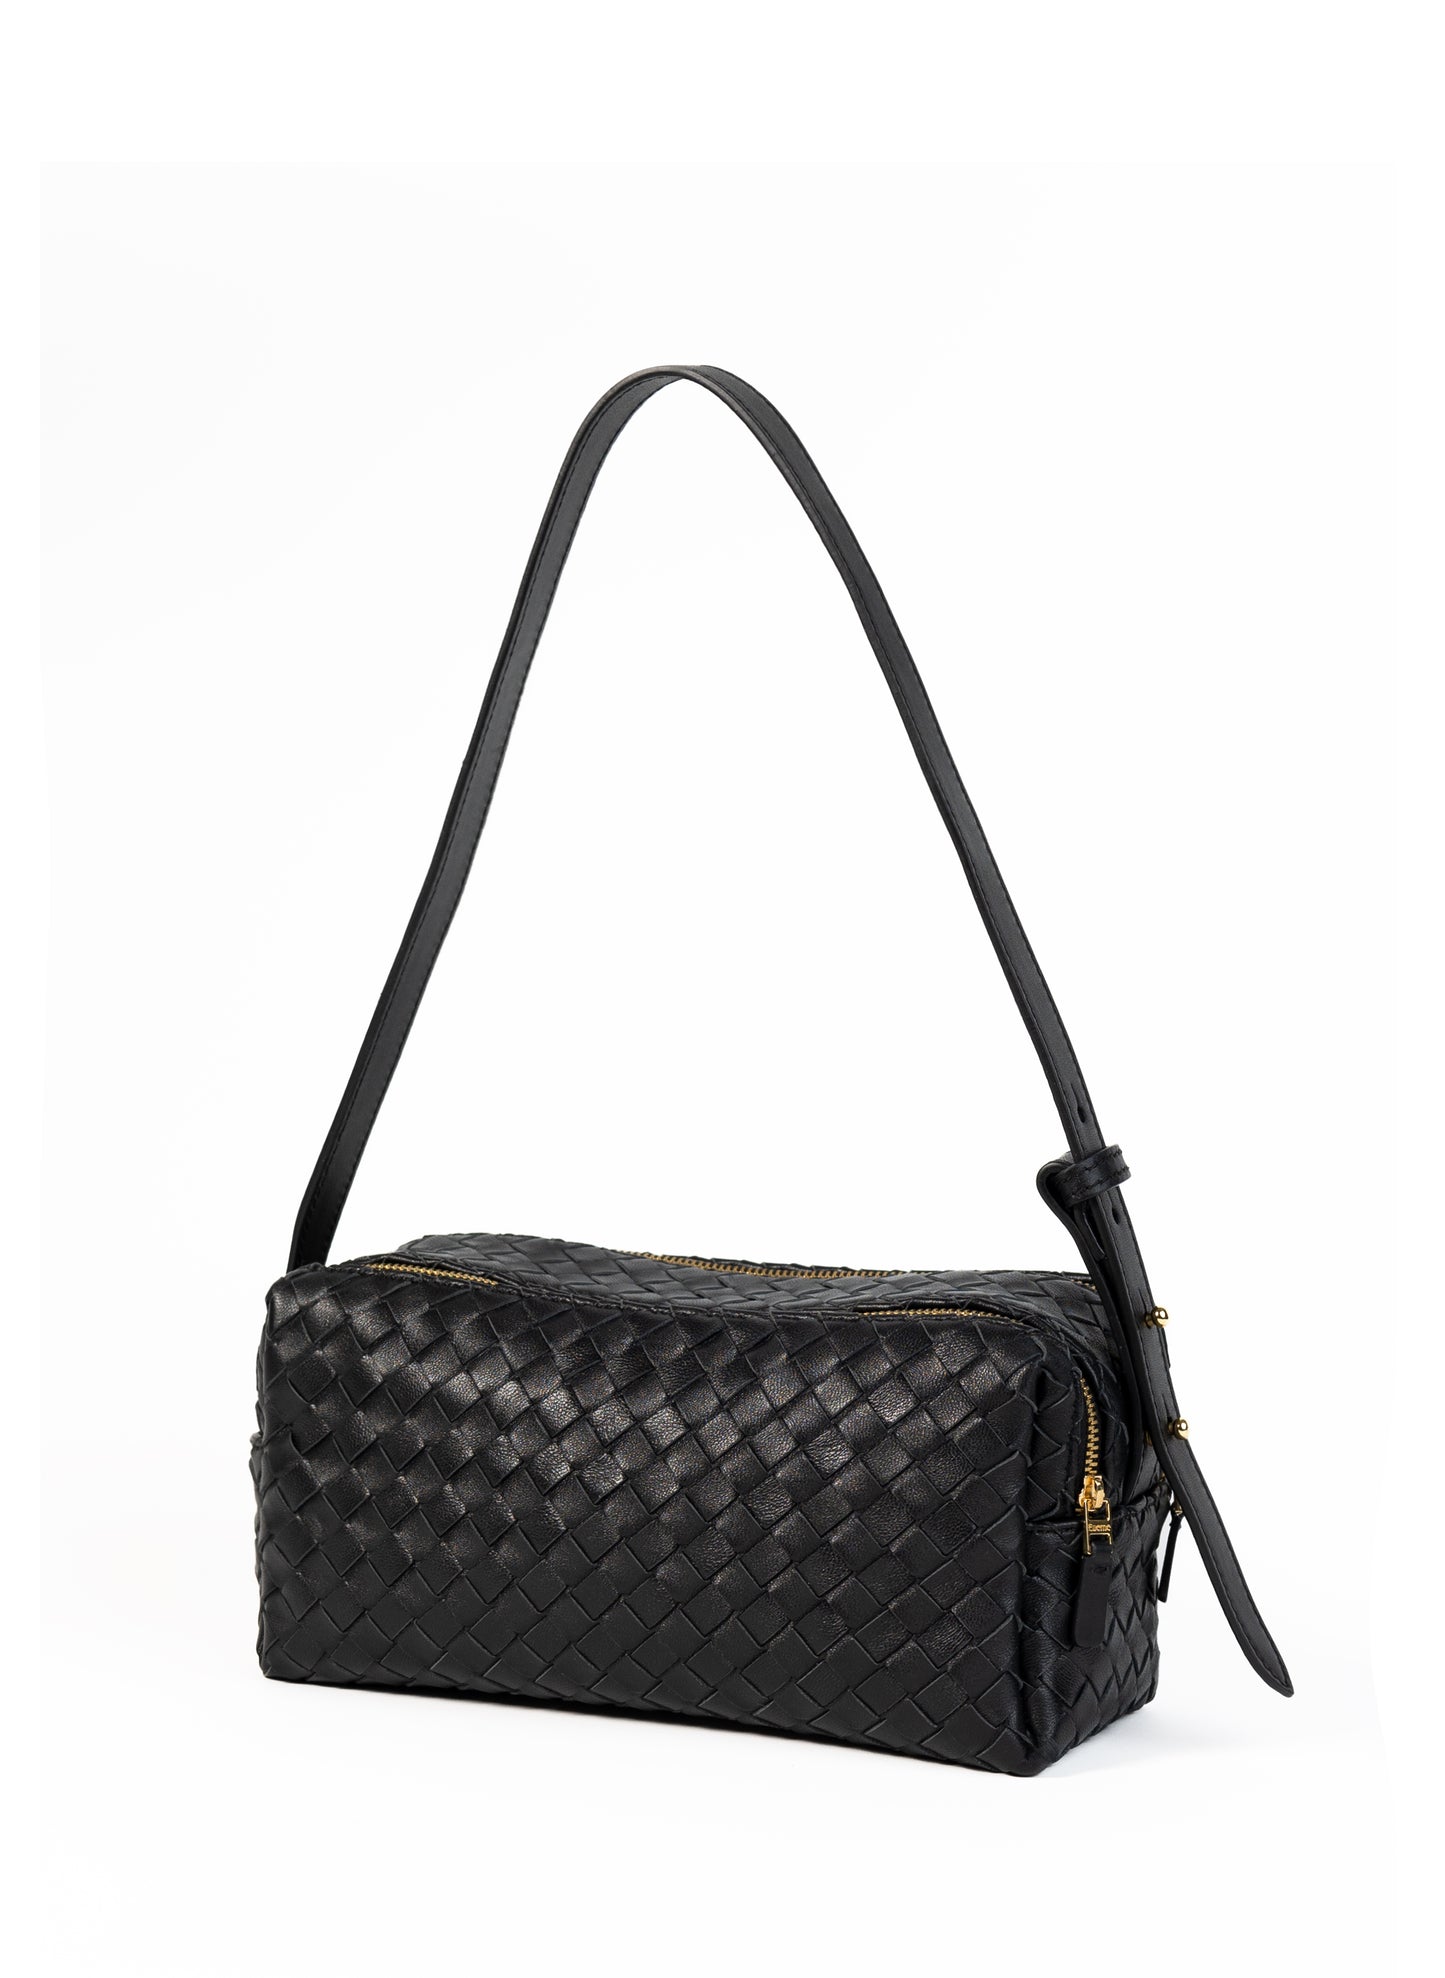 Trousse Intrecciata Leather Black/Pre order delivery in 2 weeks